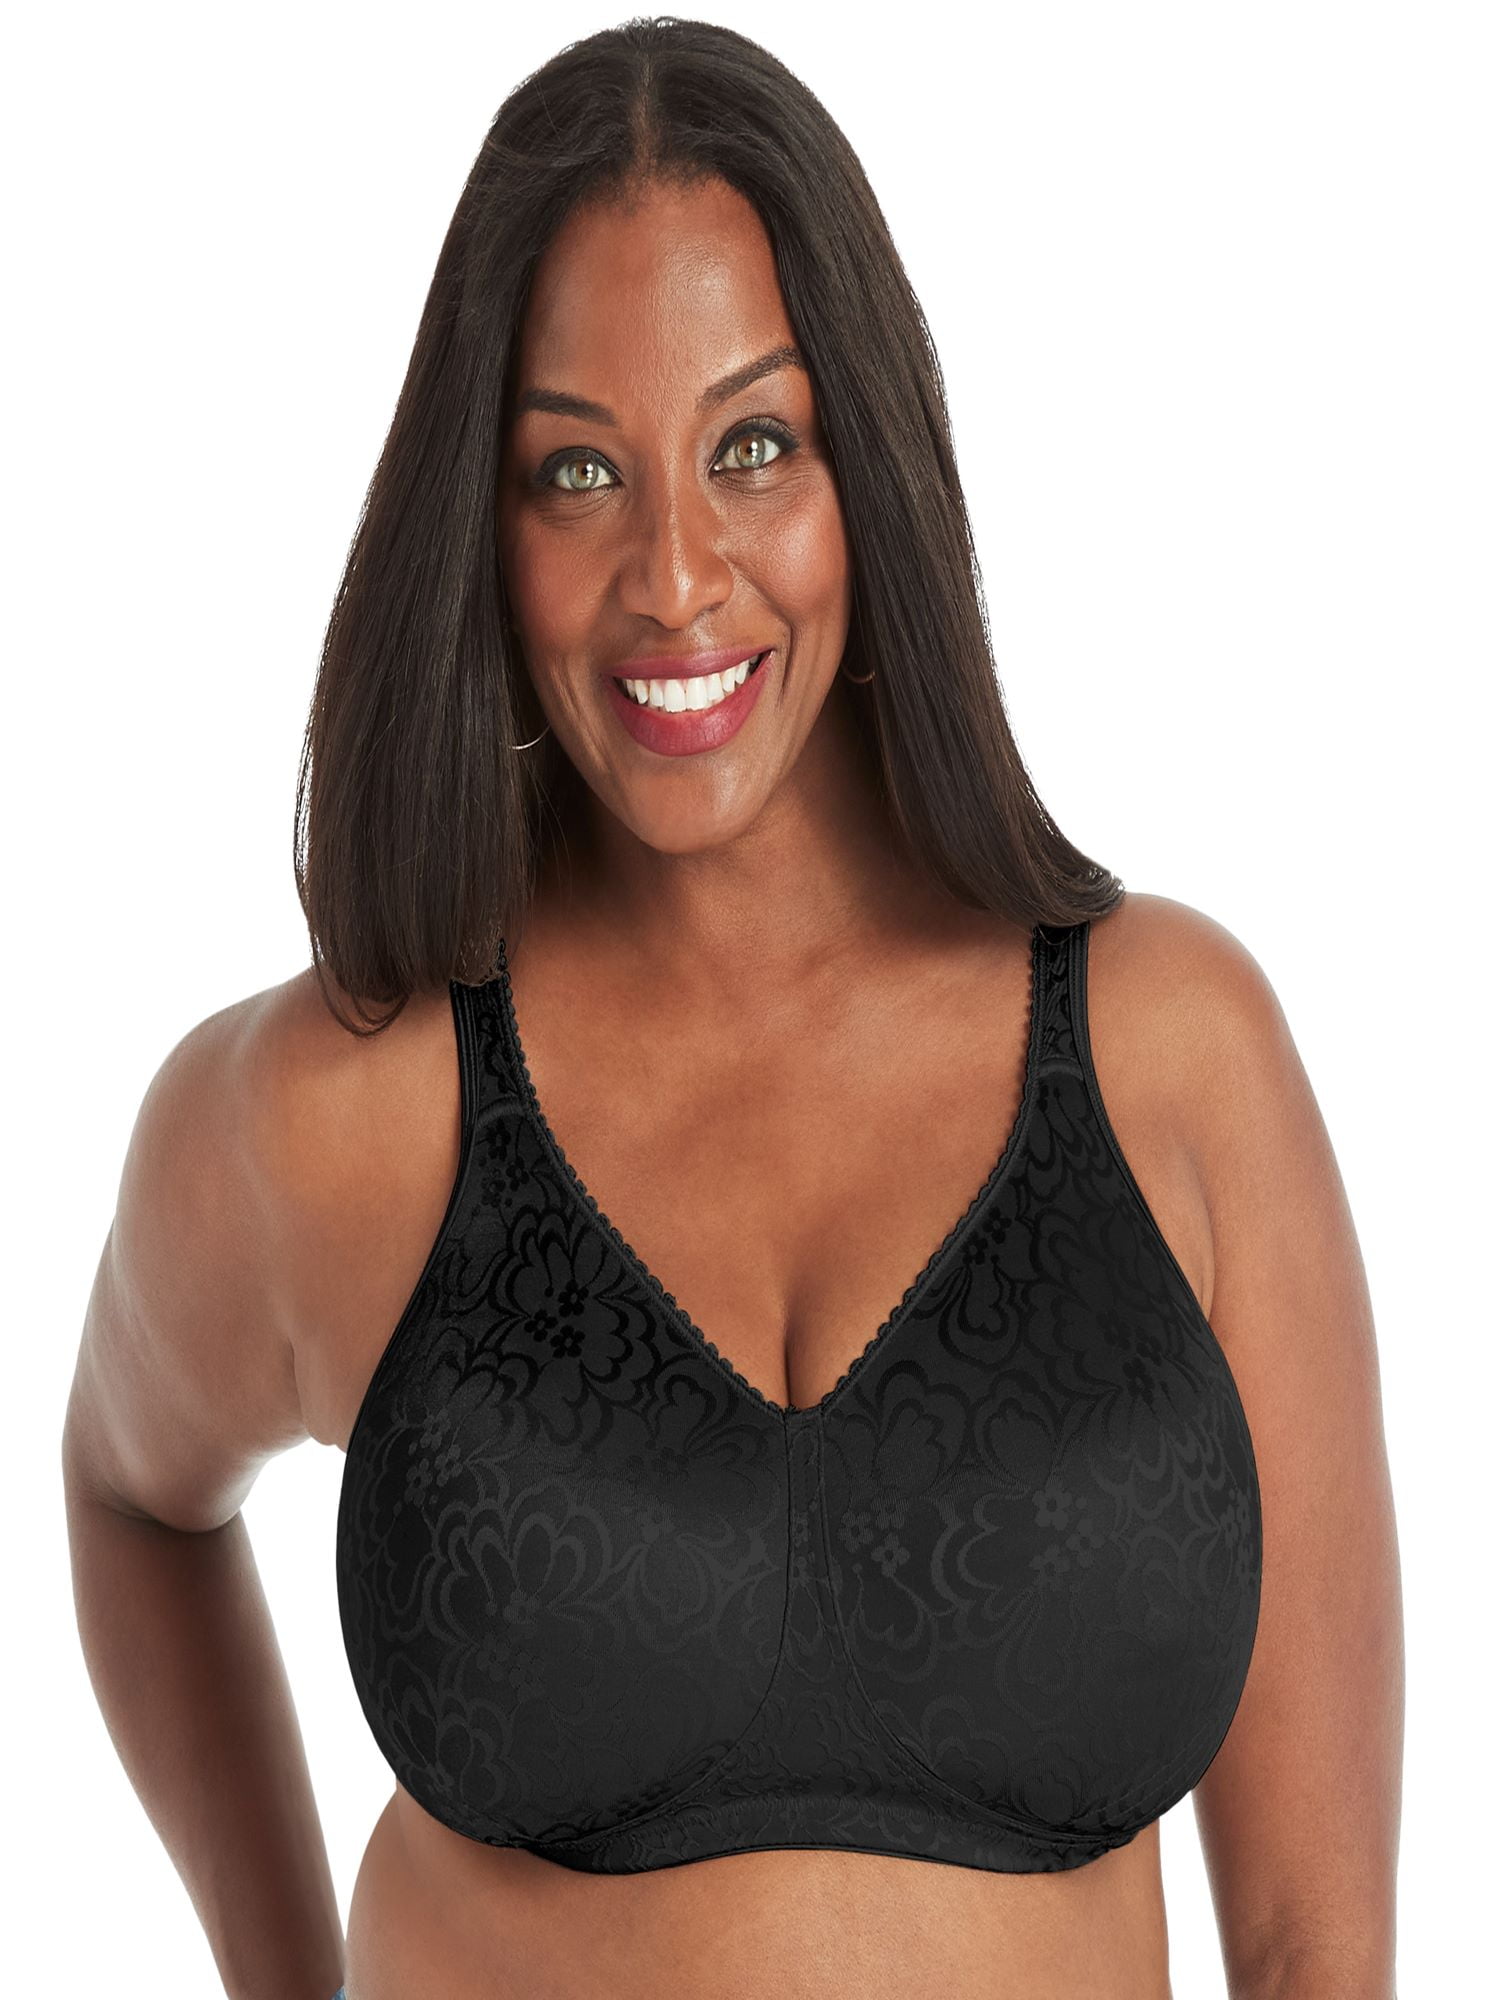 Vintage New With Tags Playtex Secrets Lace Slimming Full Figure Underwire  Bra Tuxedo Black 42C 